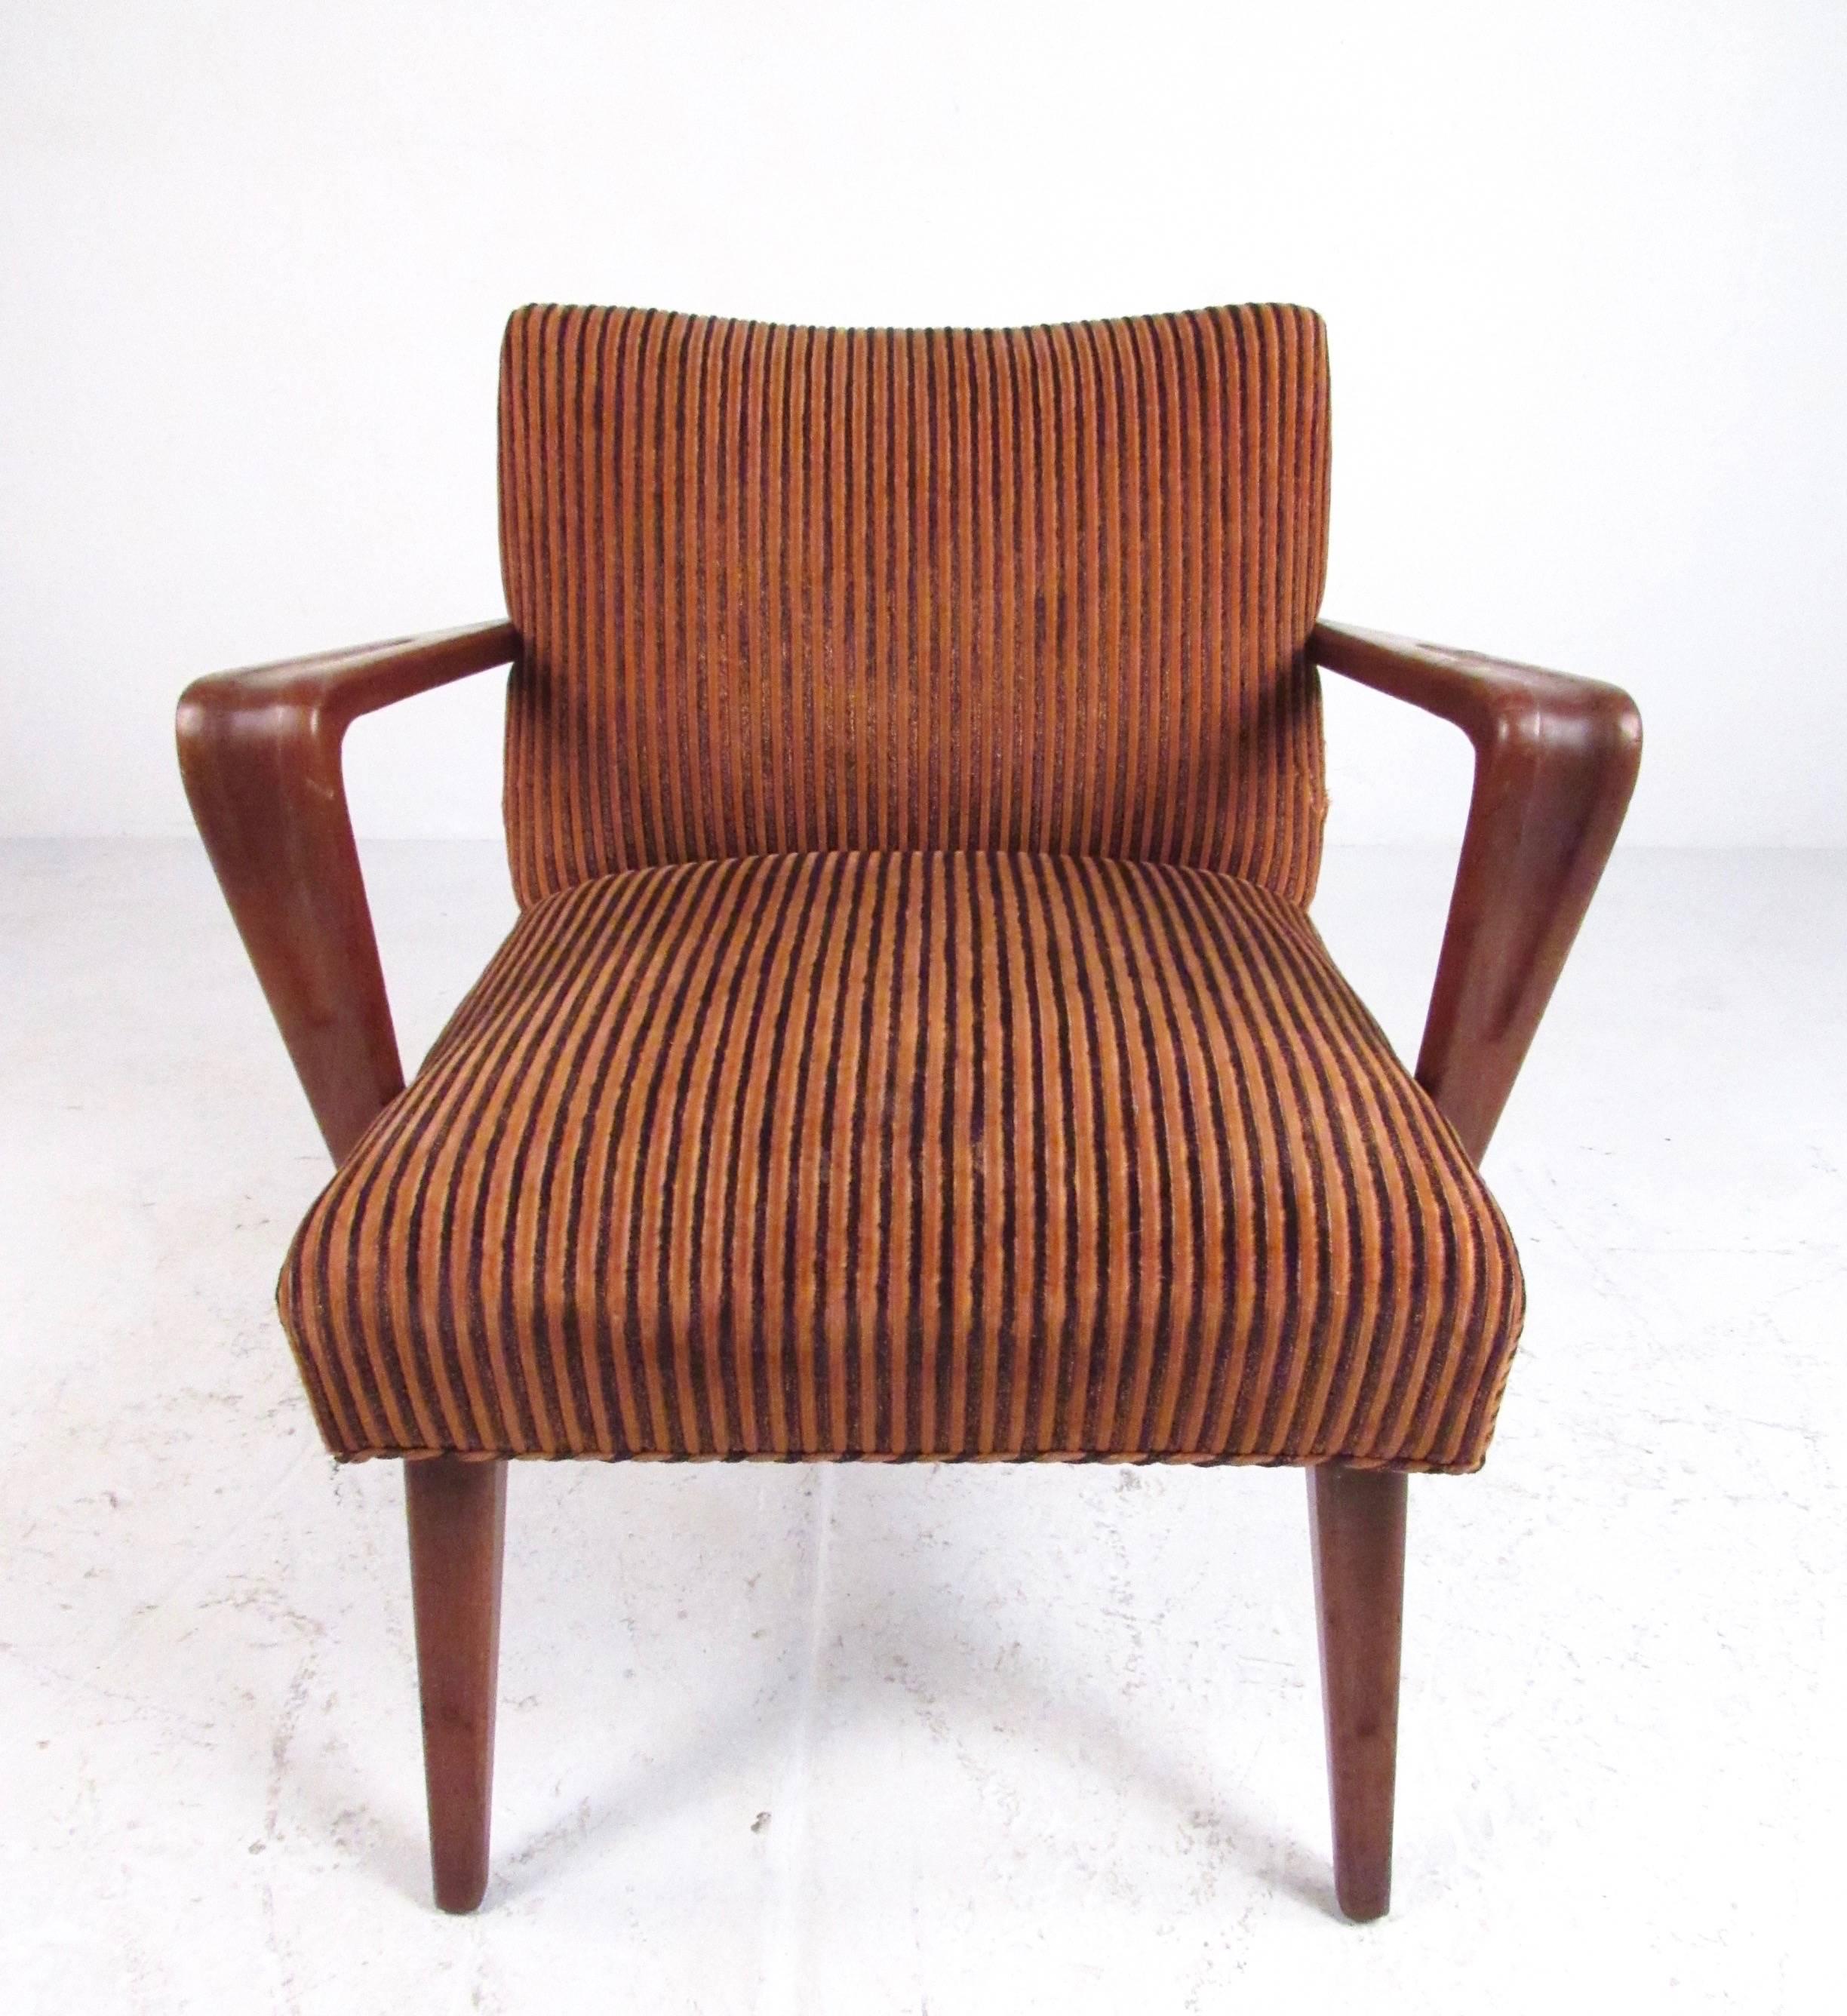 This unique Mid-Century Modern armchair features stylish tapered legs, sculptural arm rests, vintage modern fabric, and comfortable shapely design. This petite side chair makes an excellent seating option in any interior, please confirm item